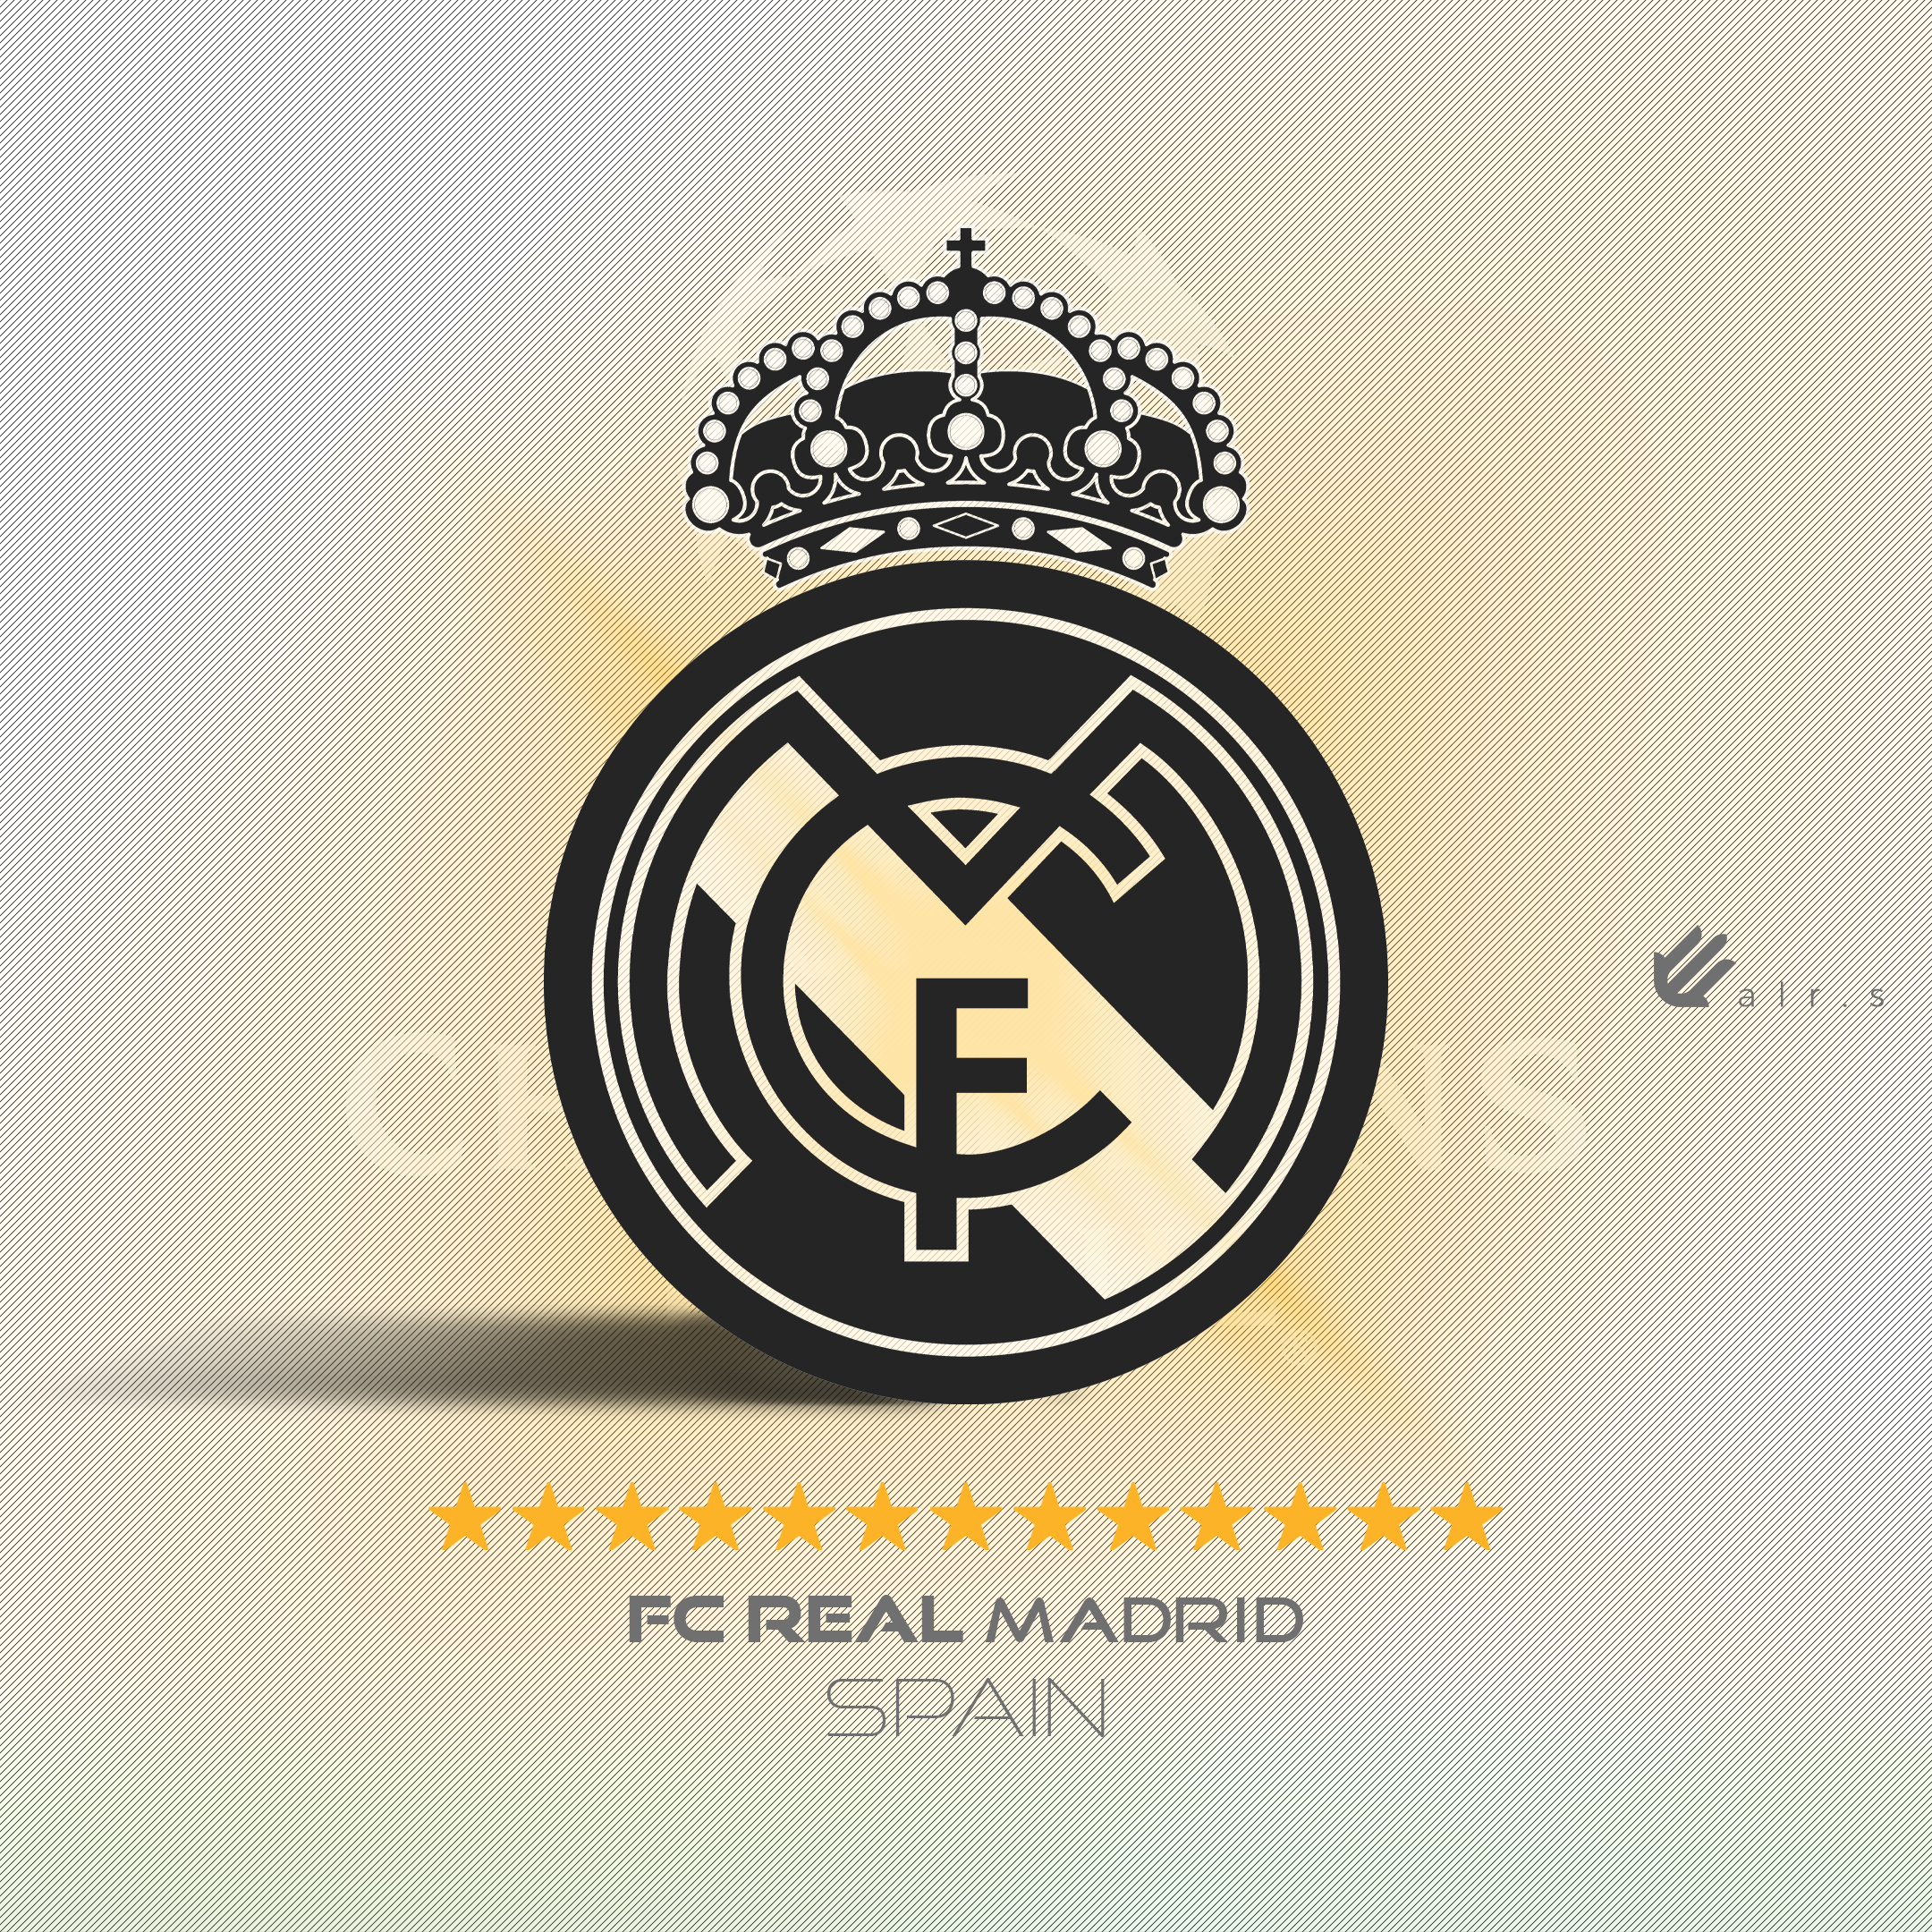 Football Real Madrid Logo Champions League Clubs Graphic Design Creativity Photography Colorful Socc 2160x2160